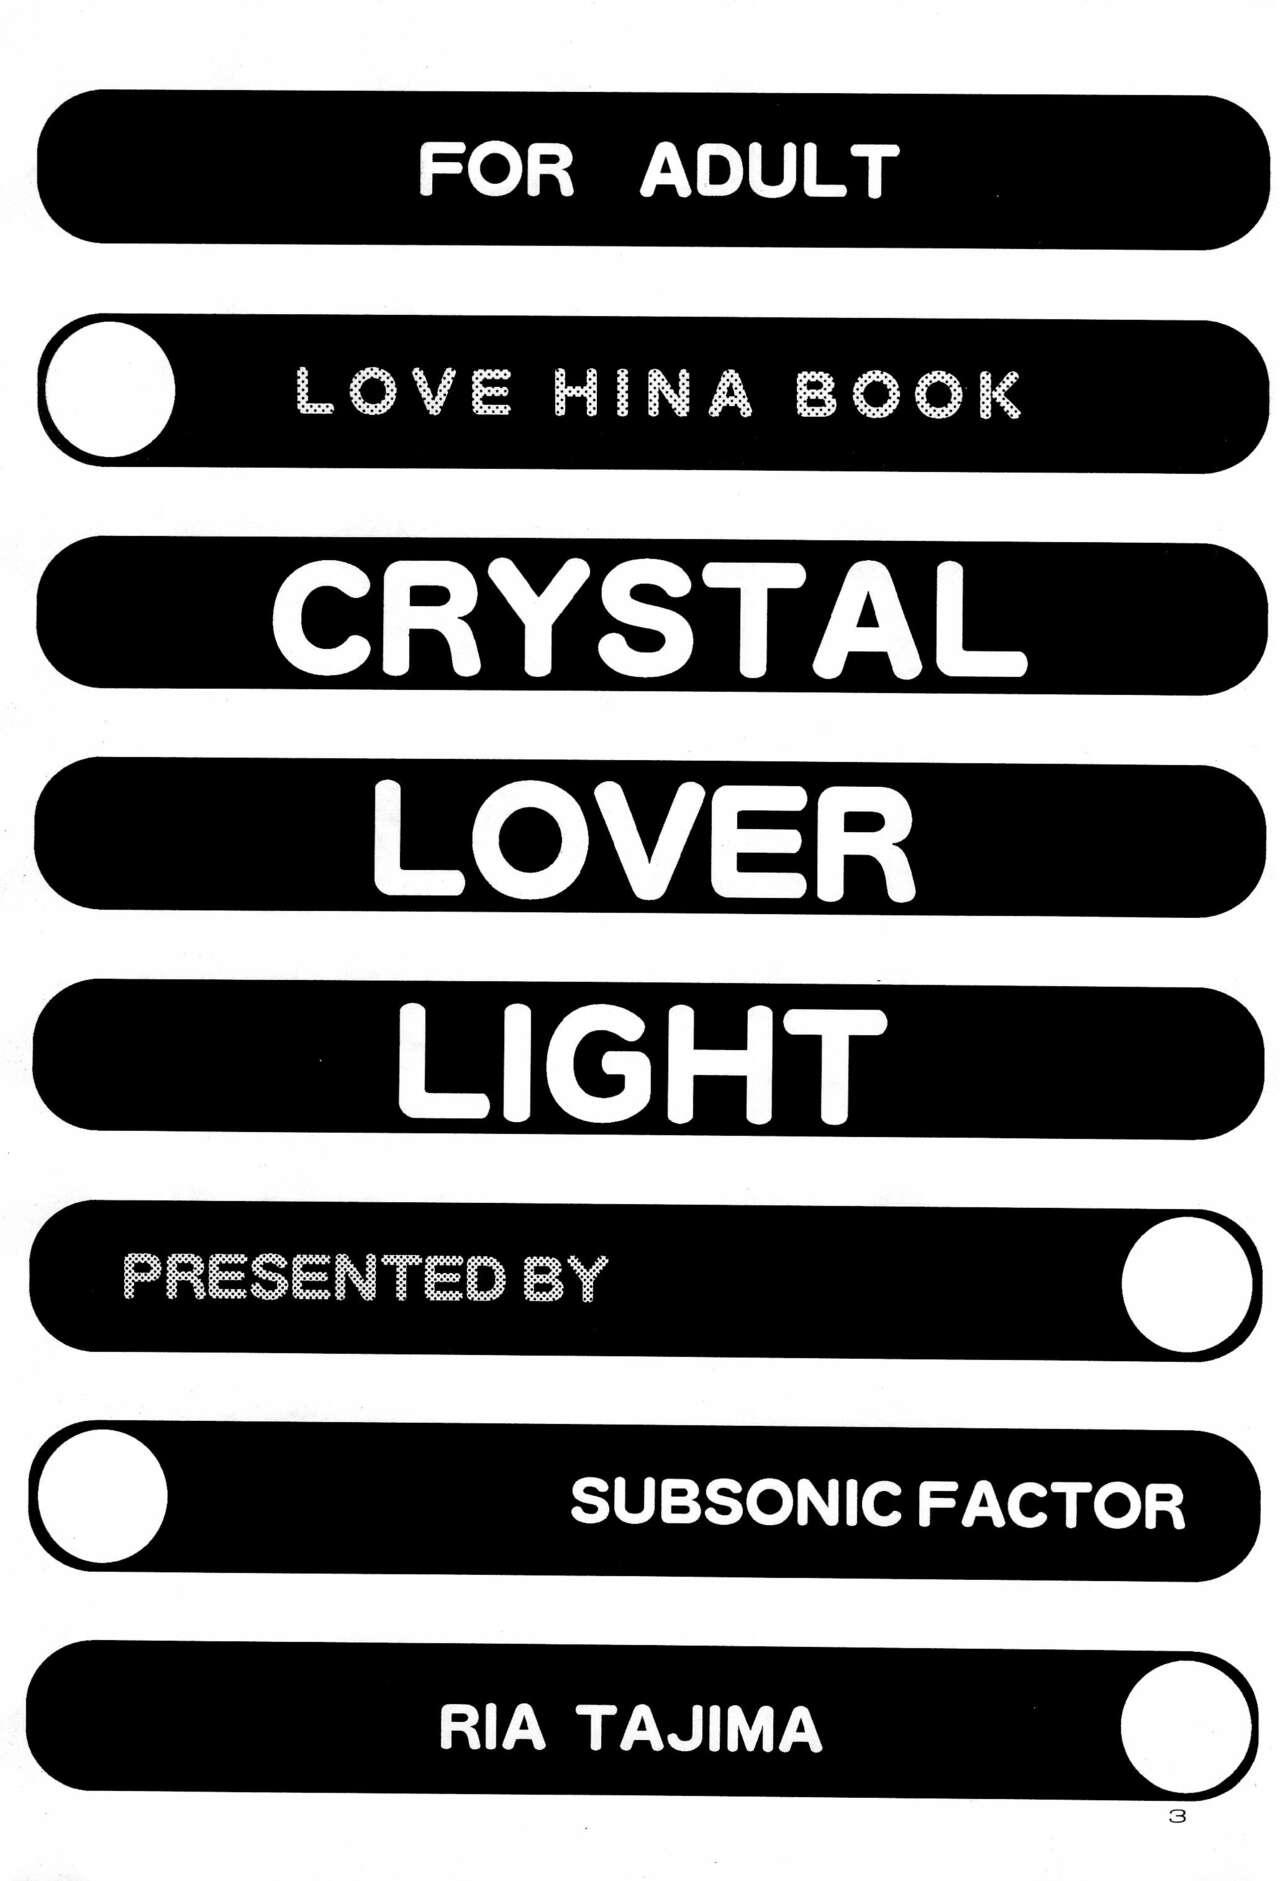 Breeding CRYSTAL LOVER LIGHT - Love hina Fucking - Picture 3